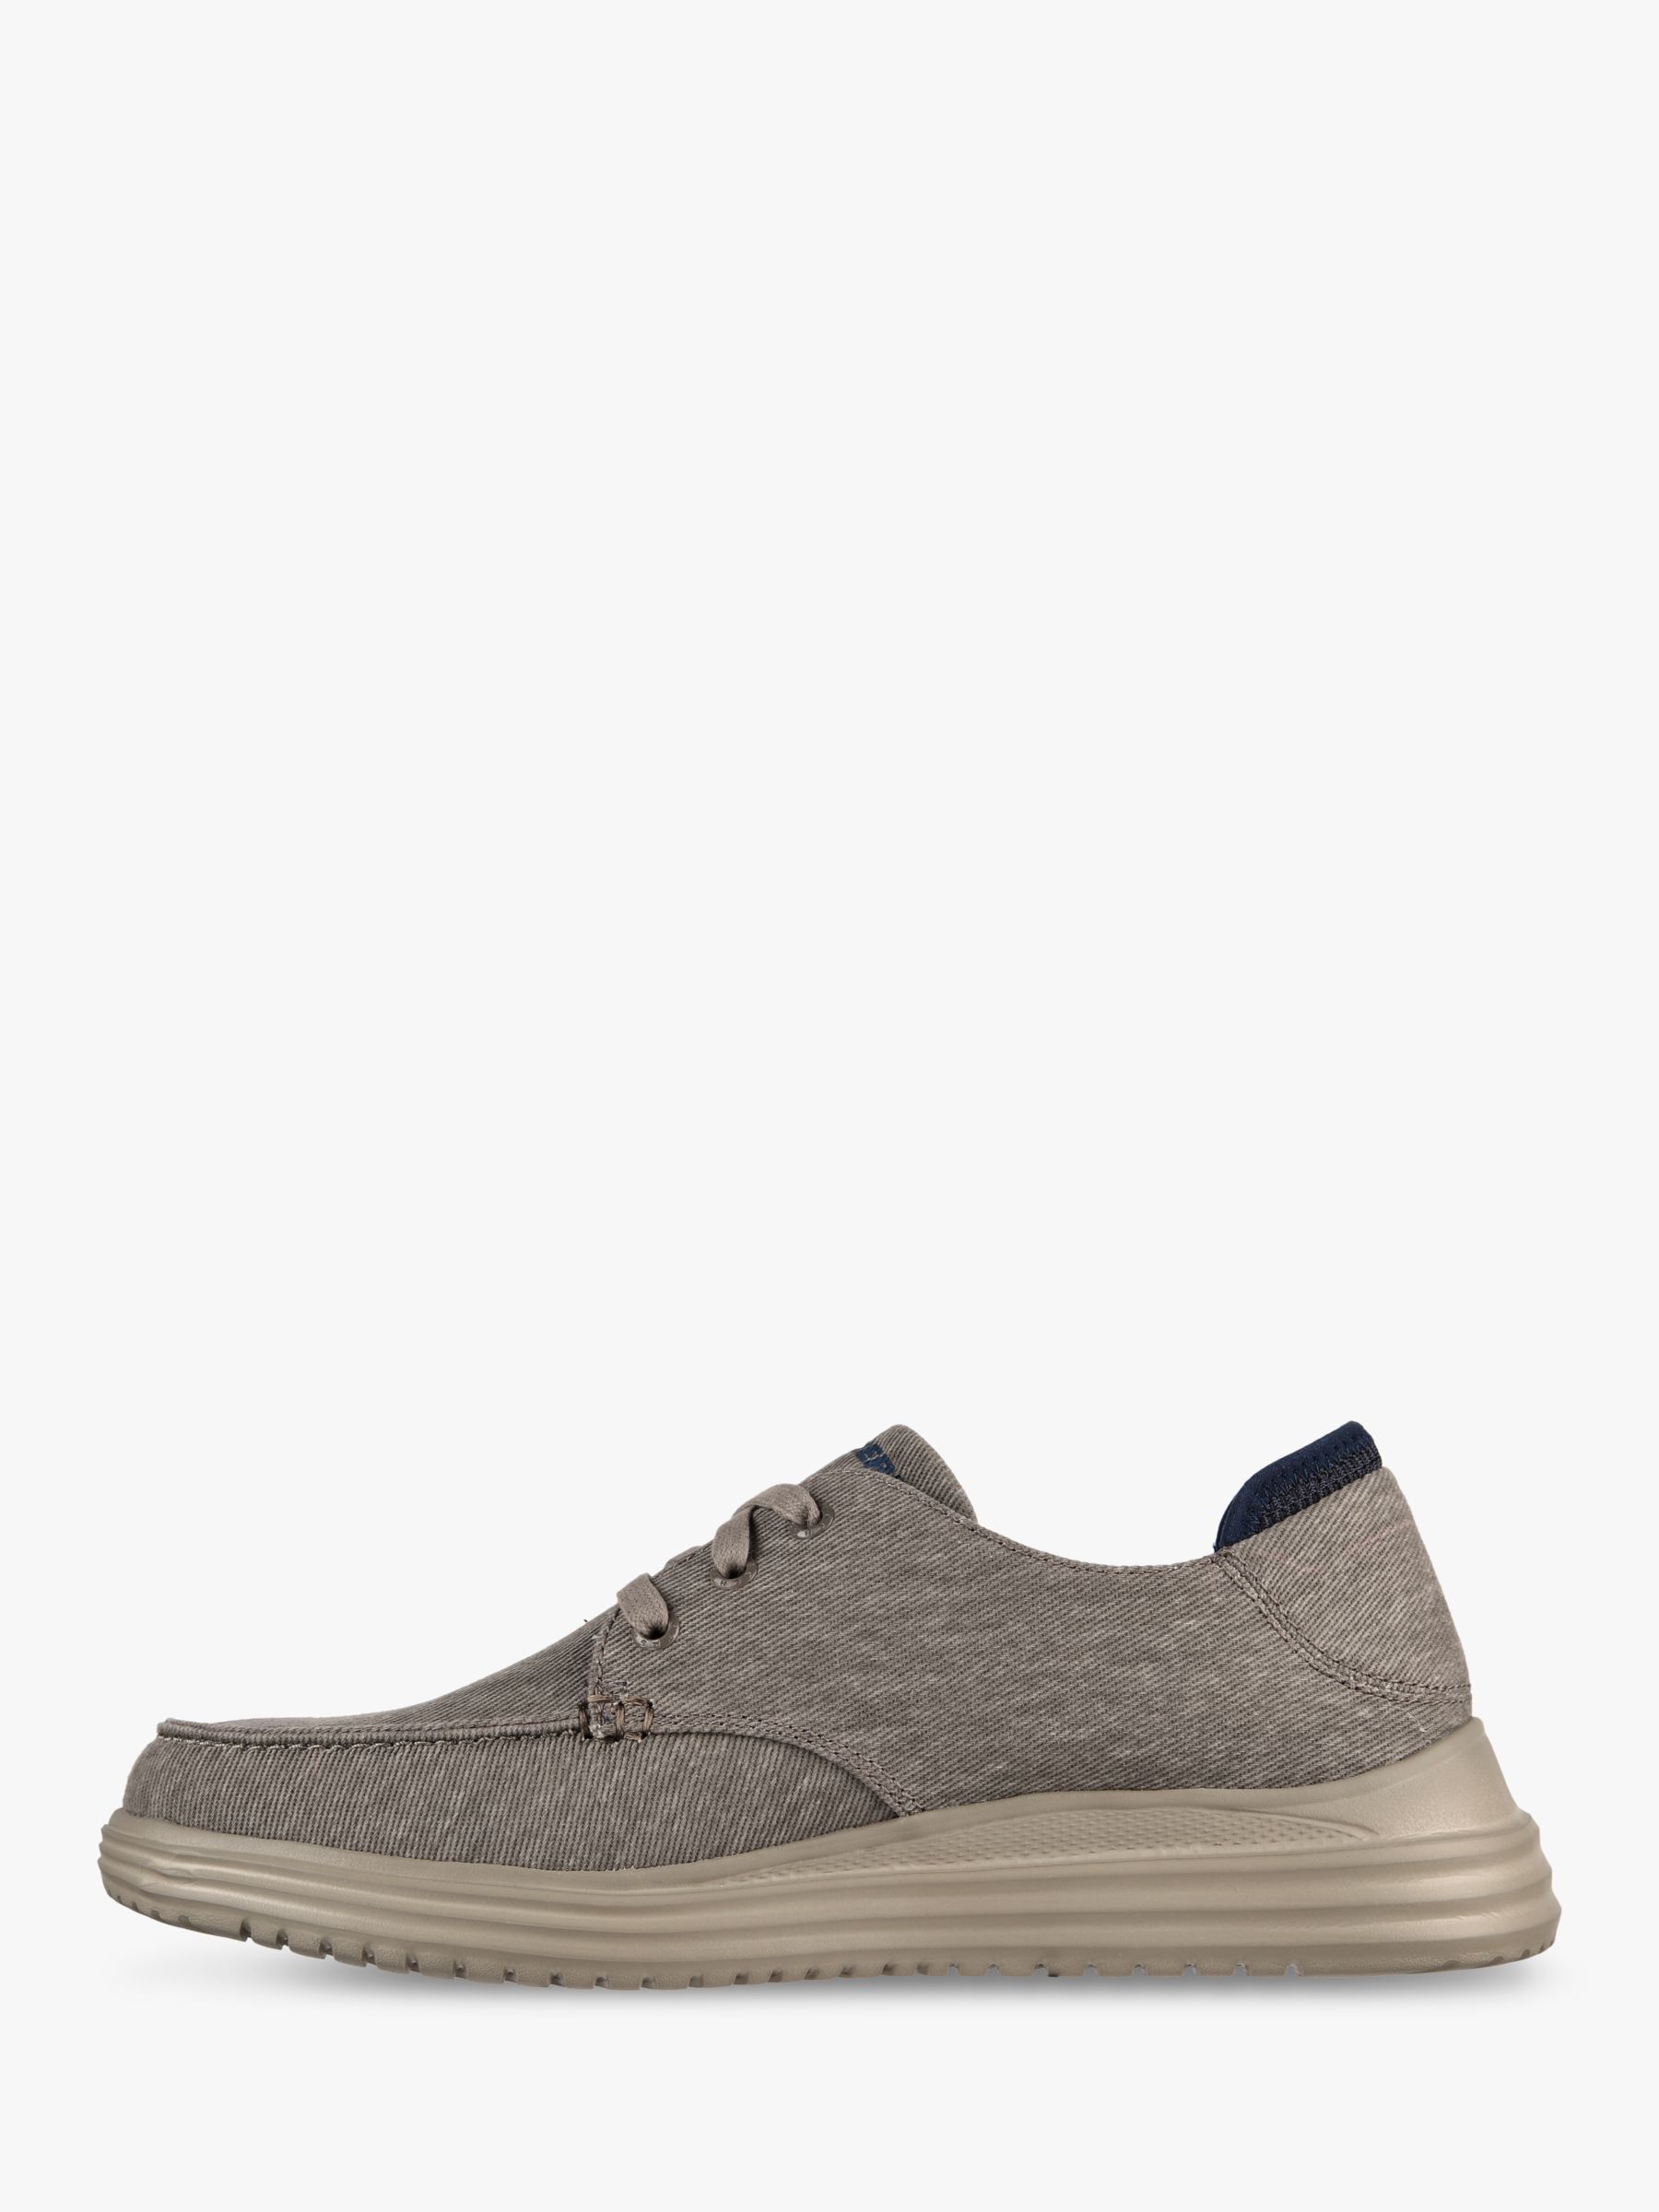 Skechers Proven Forenzo Canvas Casual Shoes, Grey